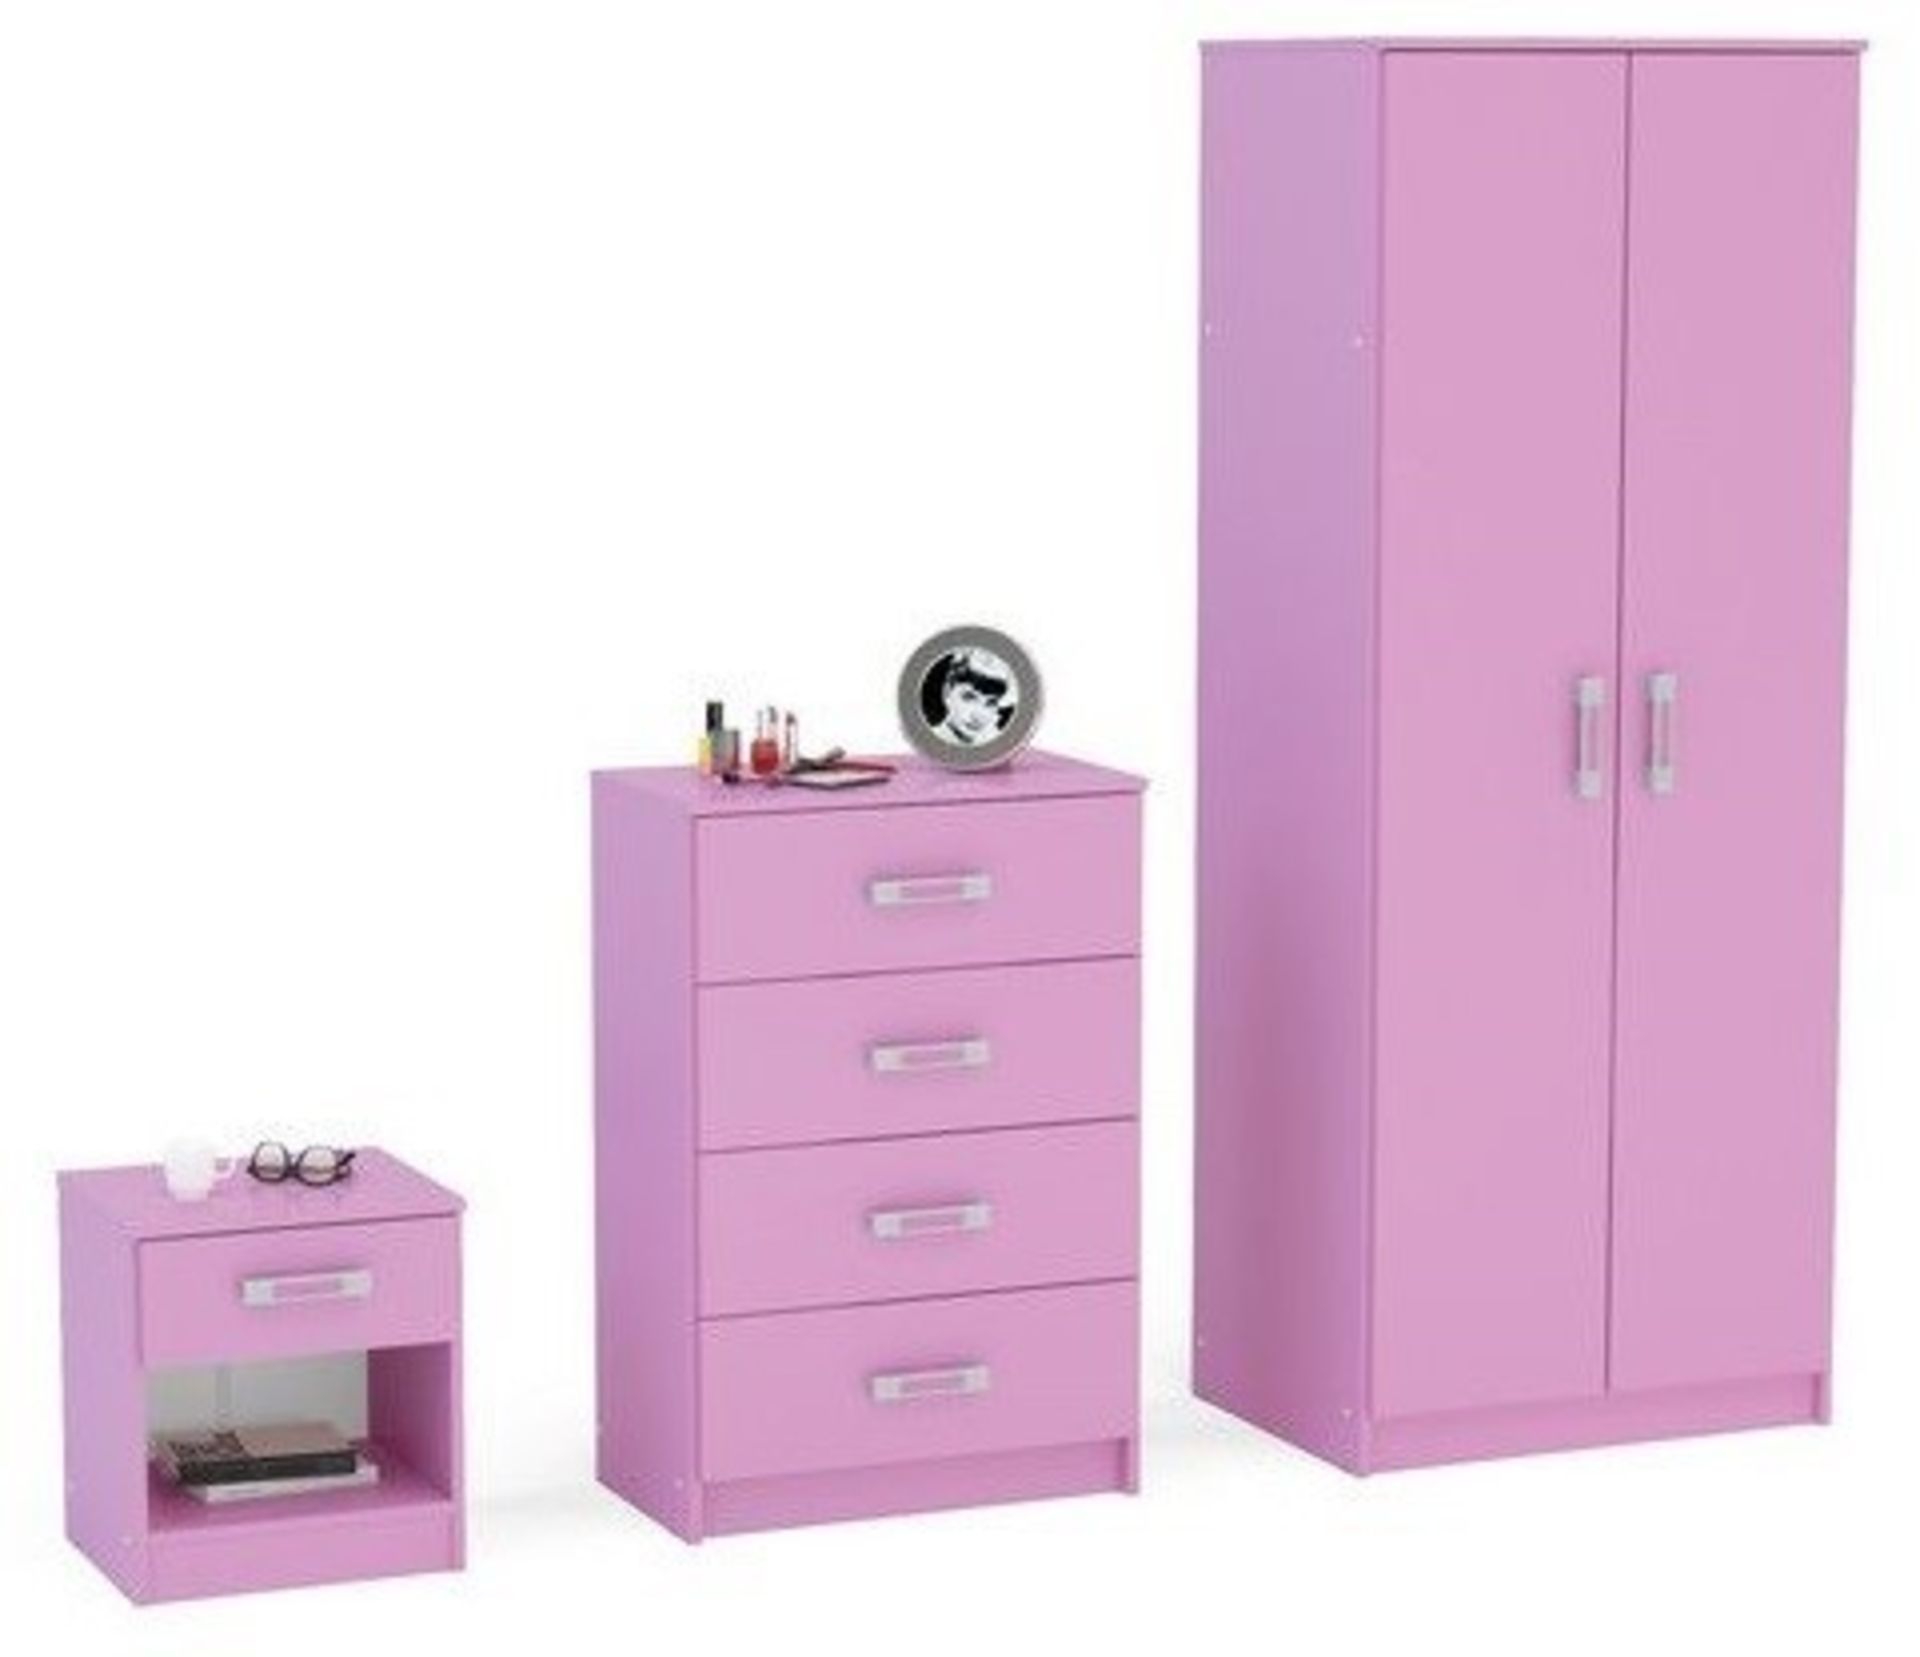 1 x "TRIO" High Gloss 3-Piece Bedroom Furniture Set In PINK - Brand New & Boxed - Includes Wardrobe, - Image 2 of 3